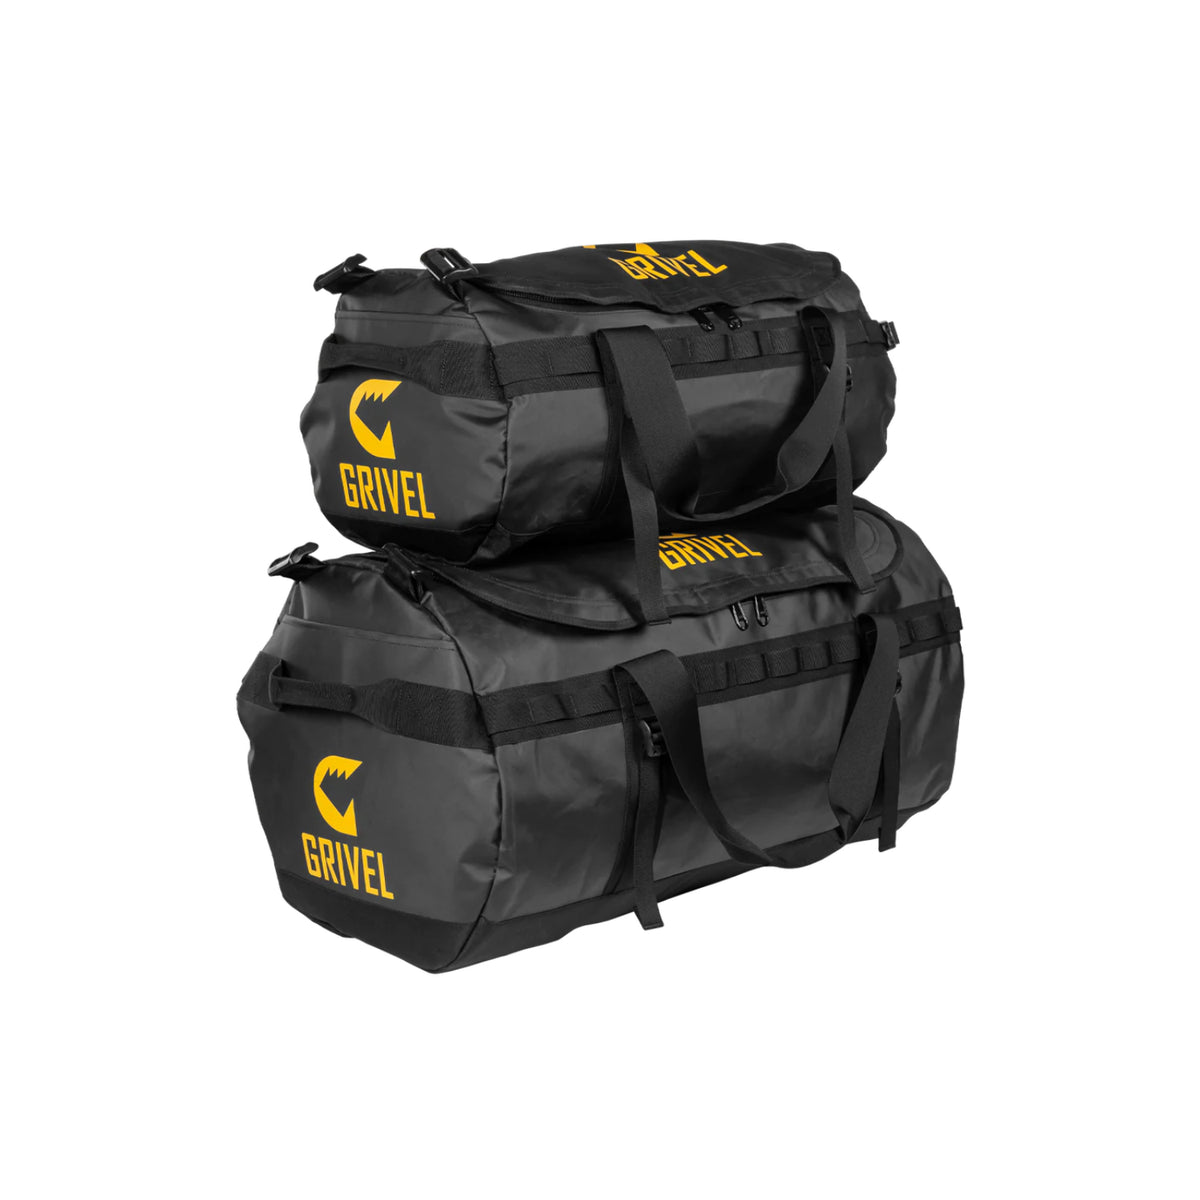 Grivel Expedition Duffel series